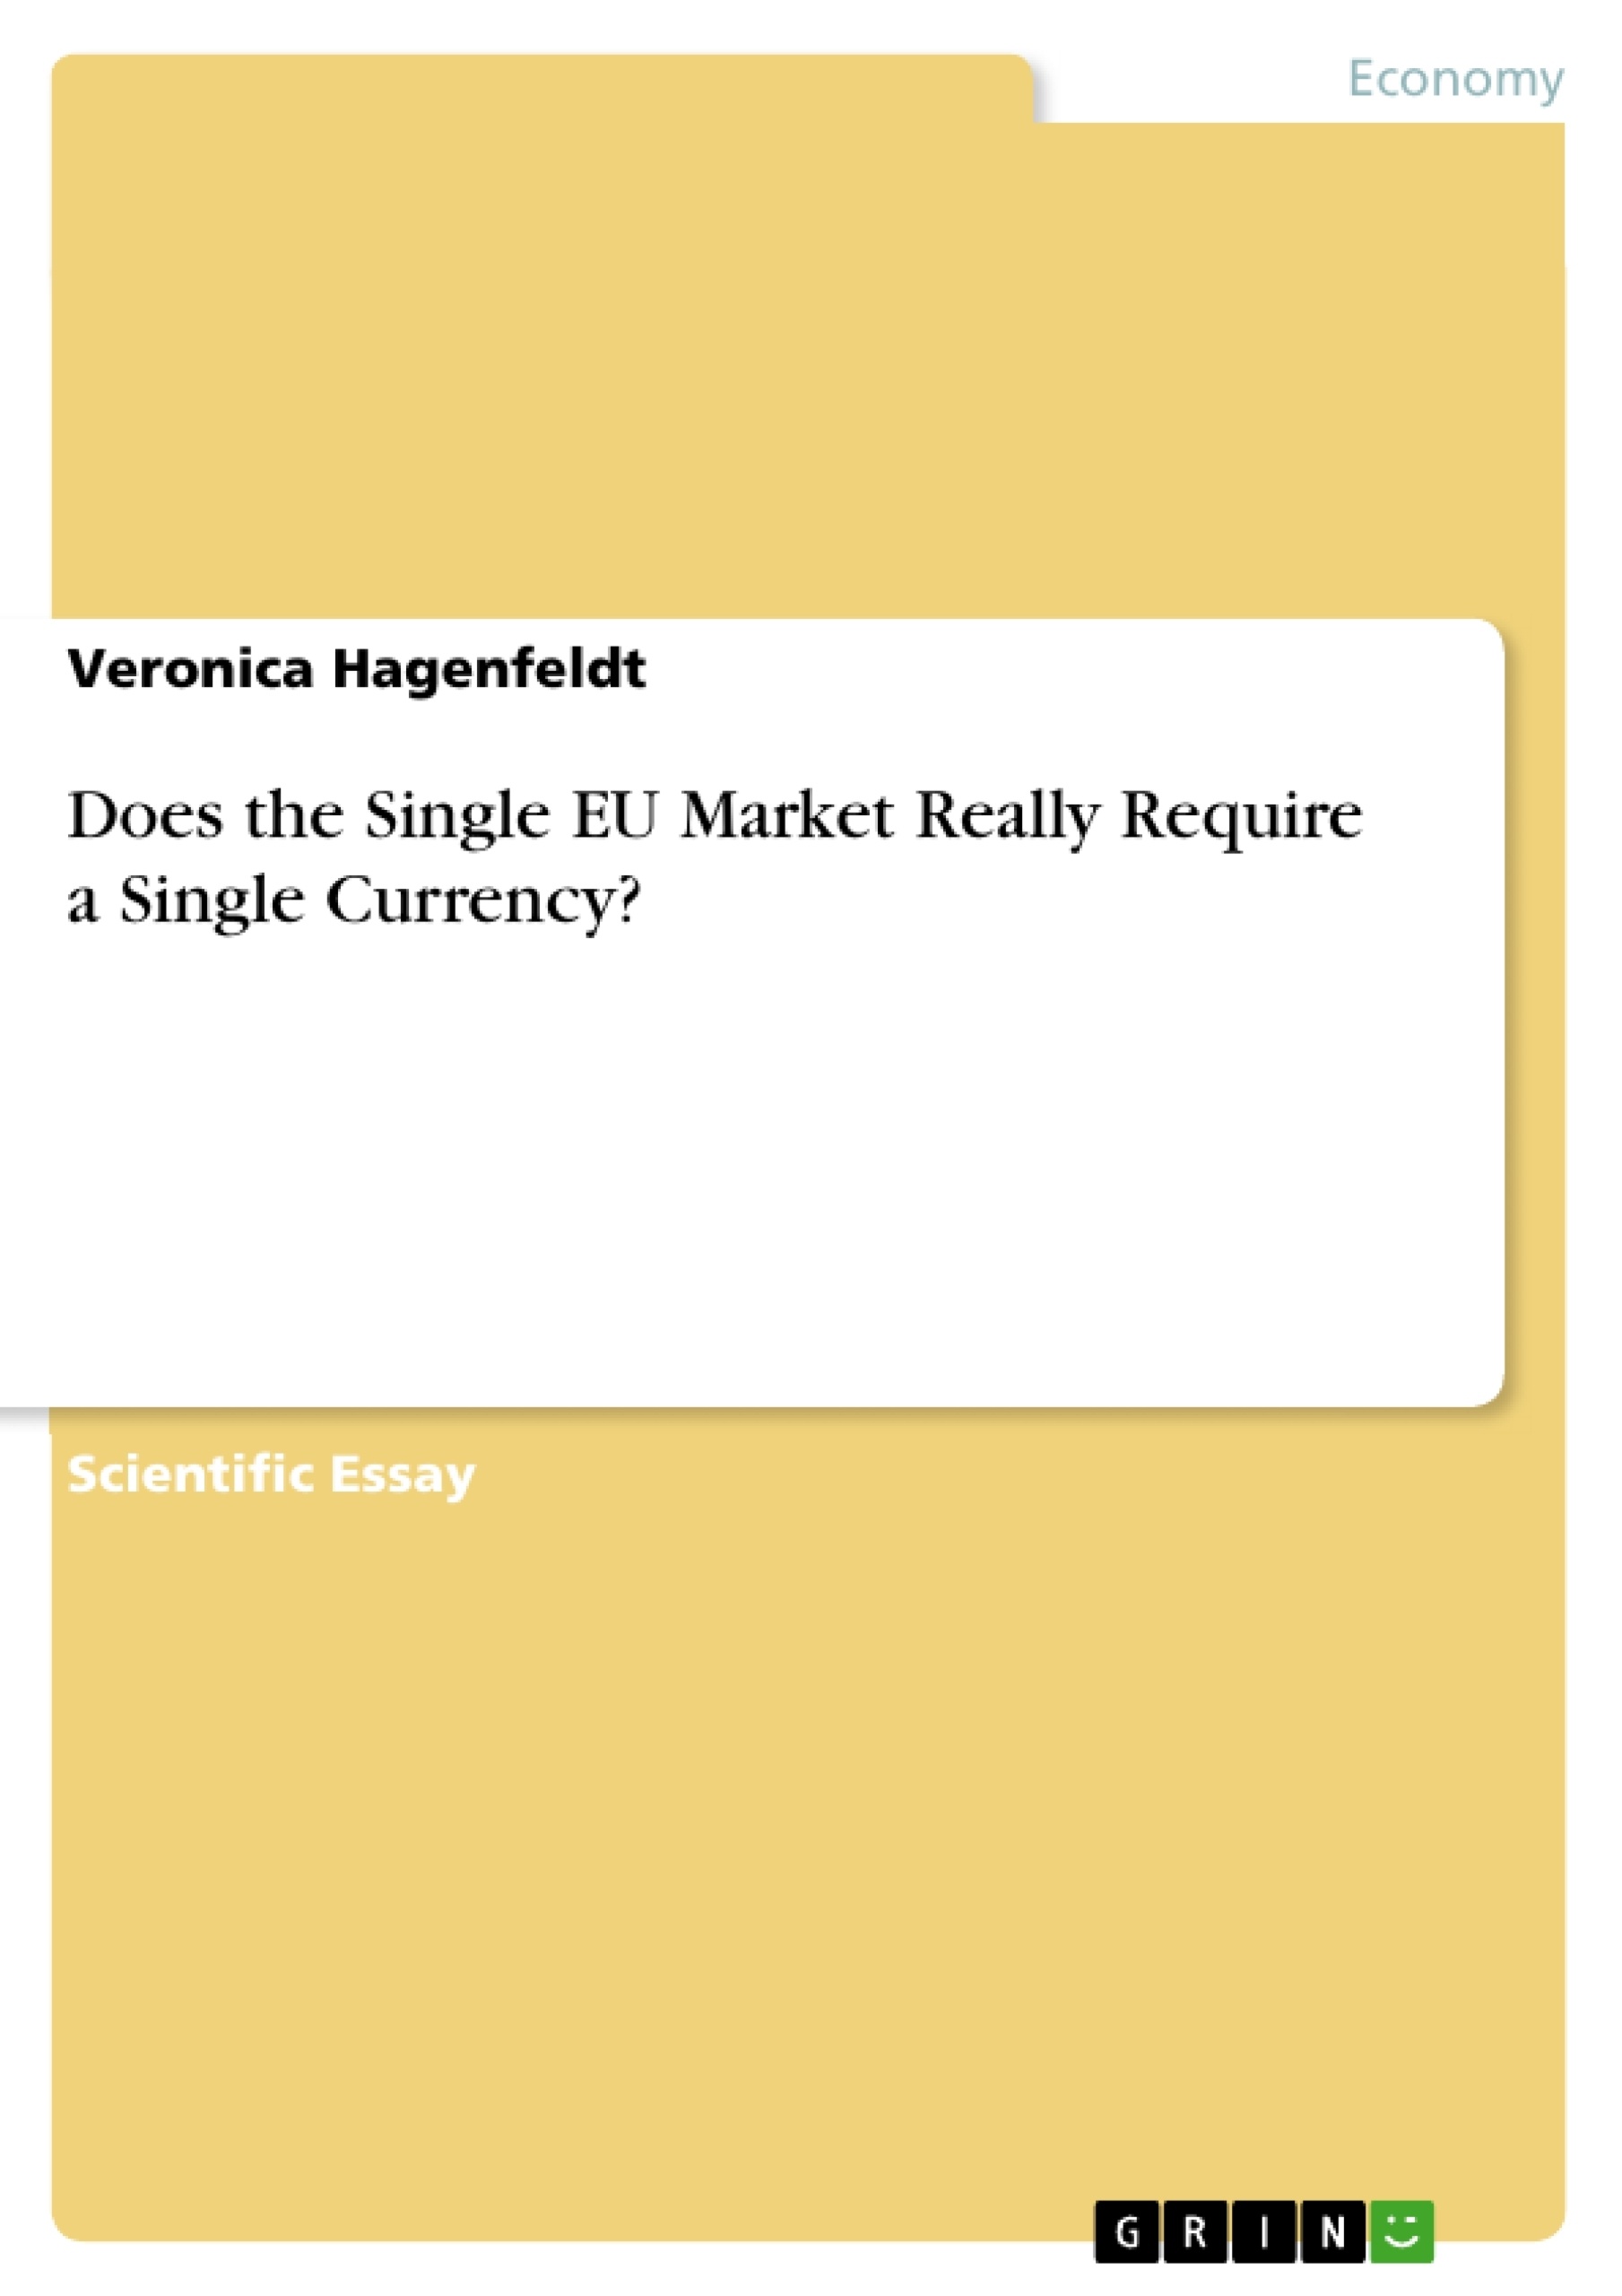 Titel: Does the Single EU Market Really Require a Single Currency?